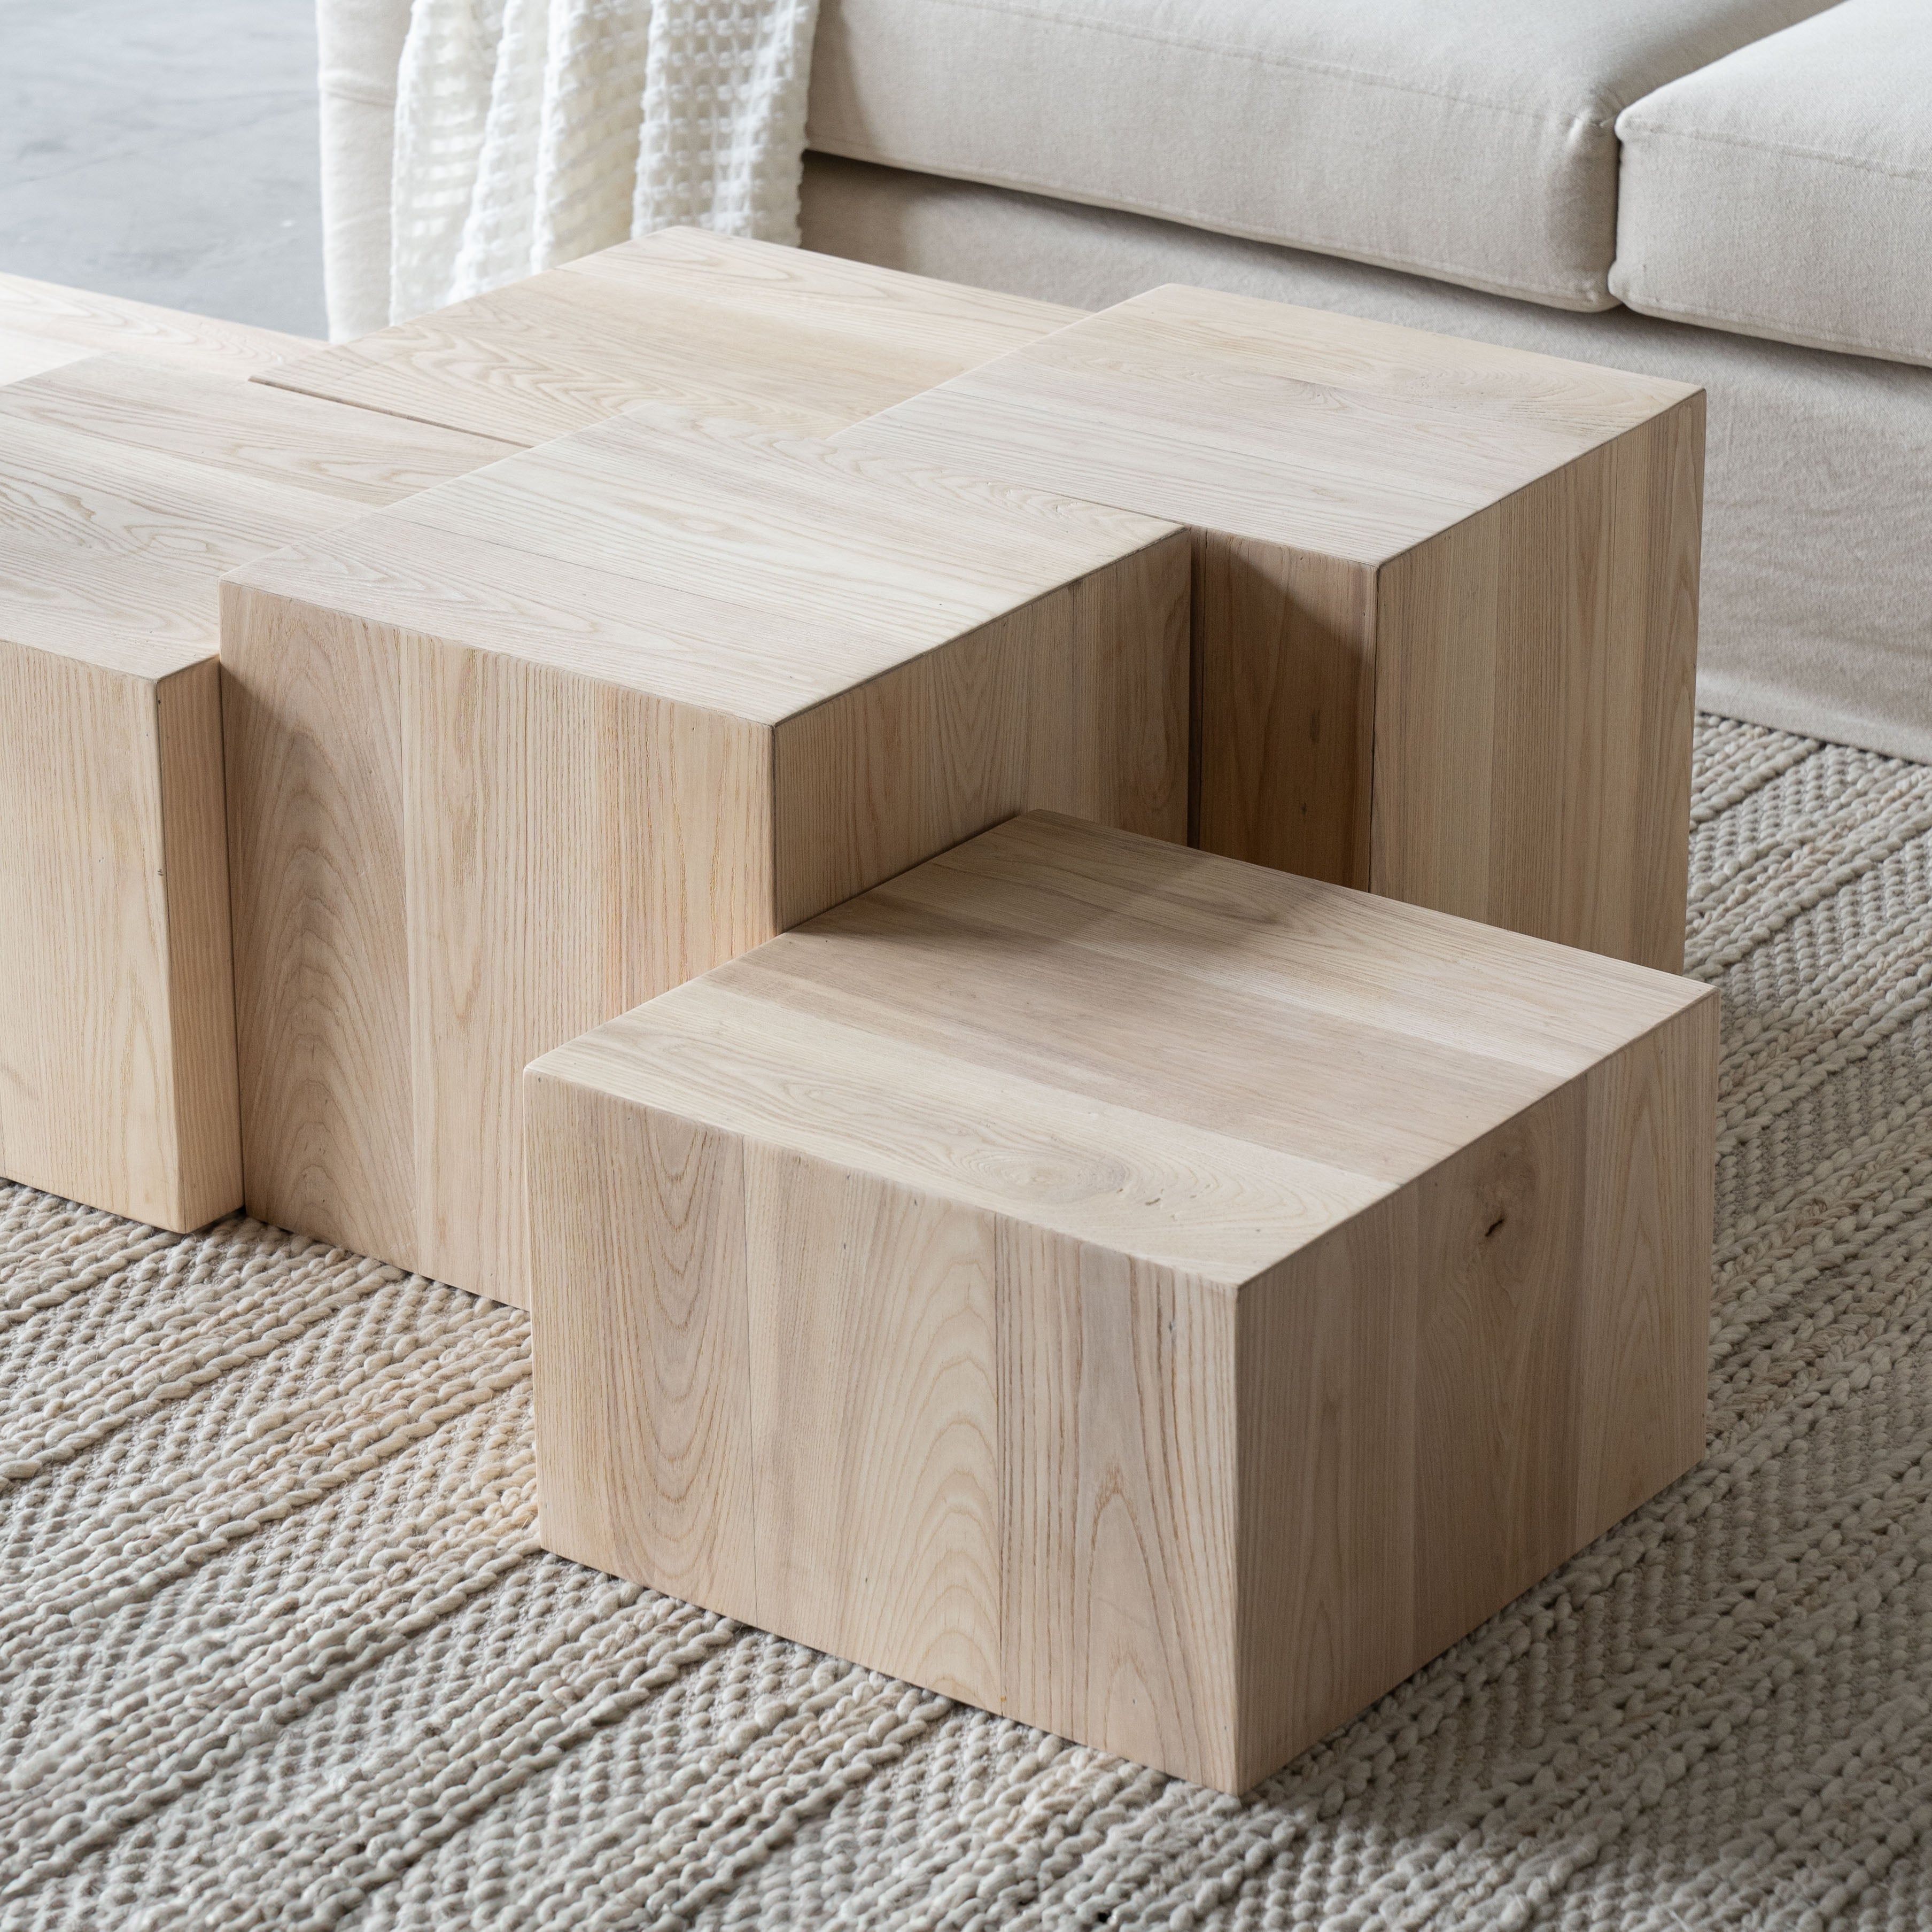 Lego Natural Wood Cube Coffee / Side Table  - WS Living - UAE - Coffee Tables Wood and steel Furnitures - Dubai